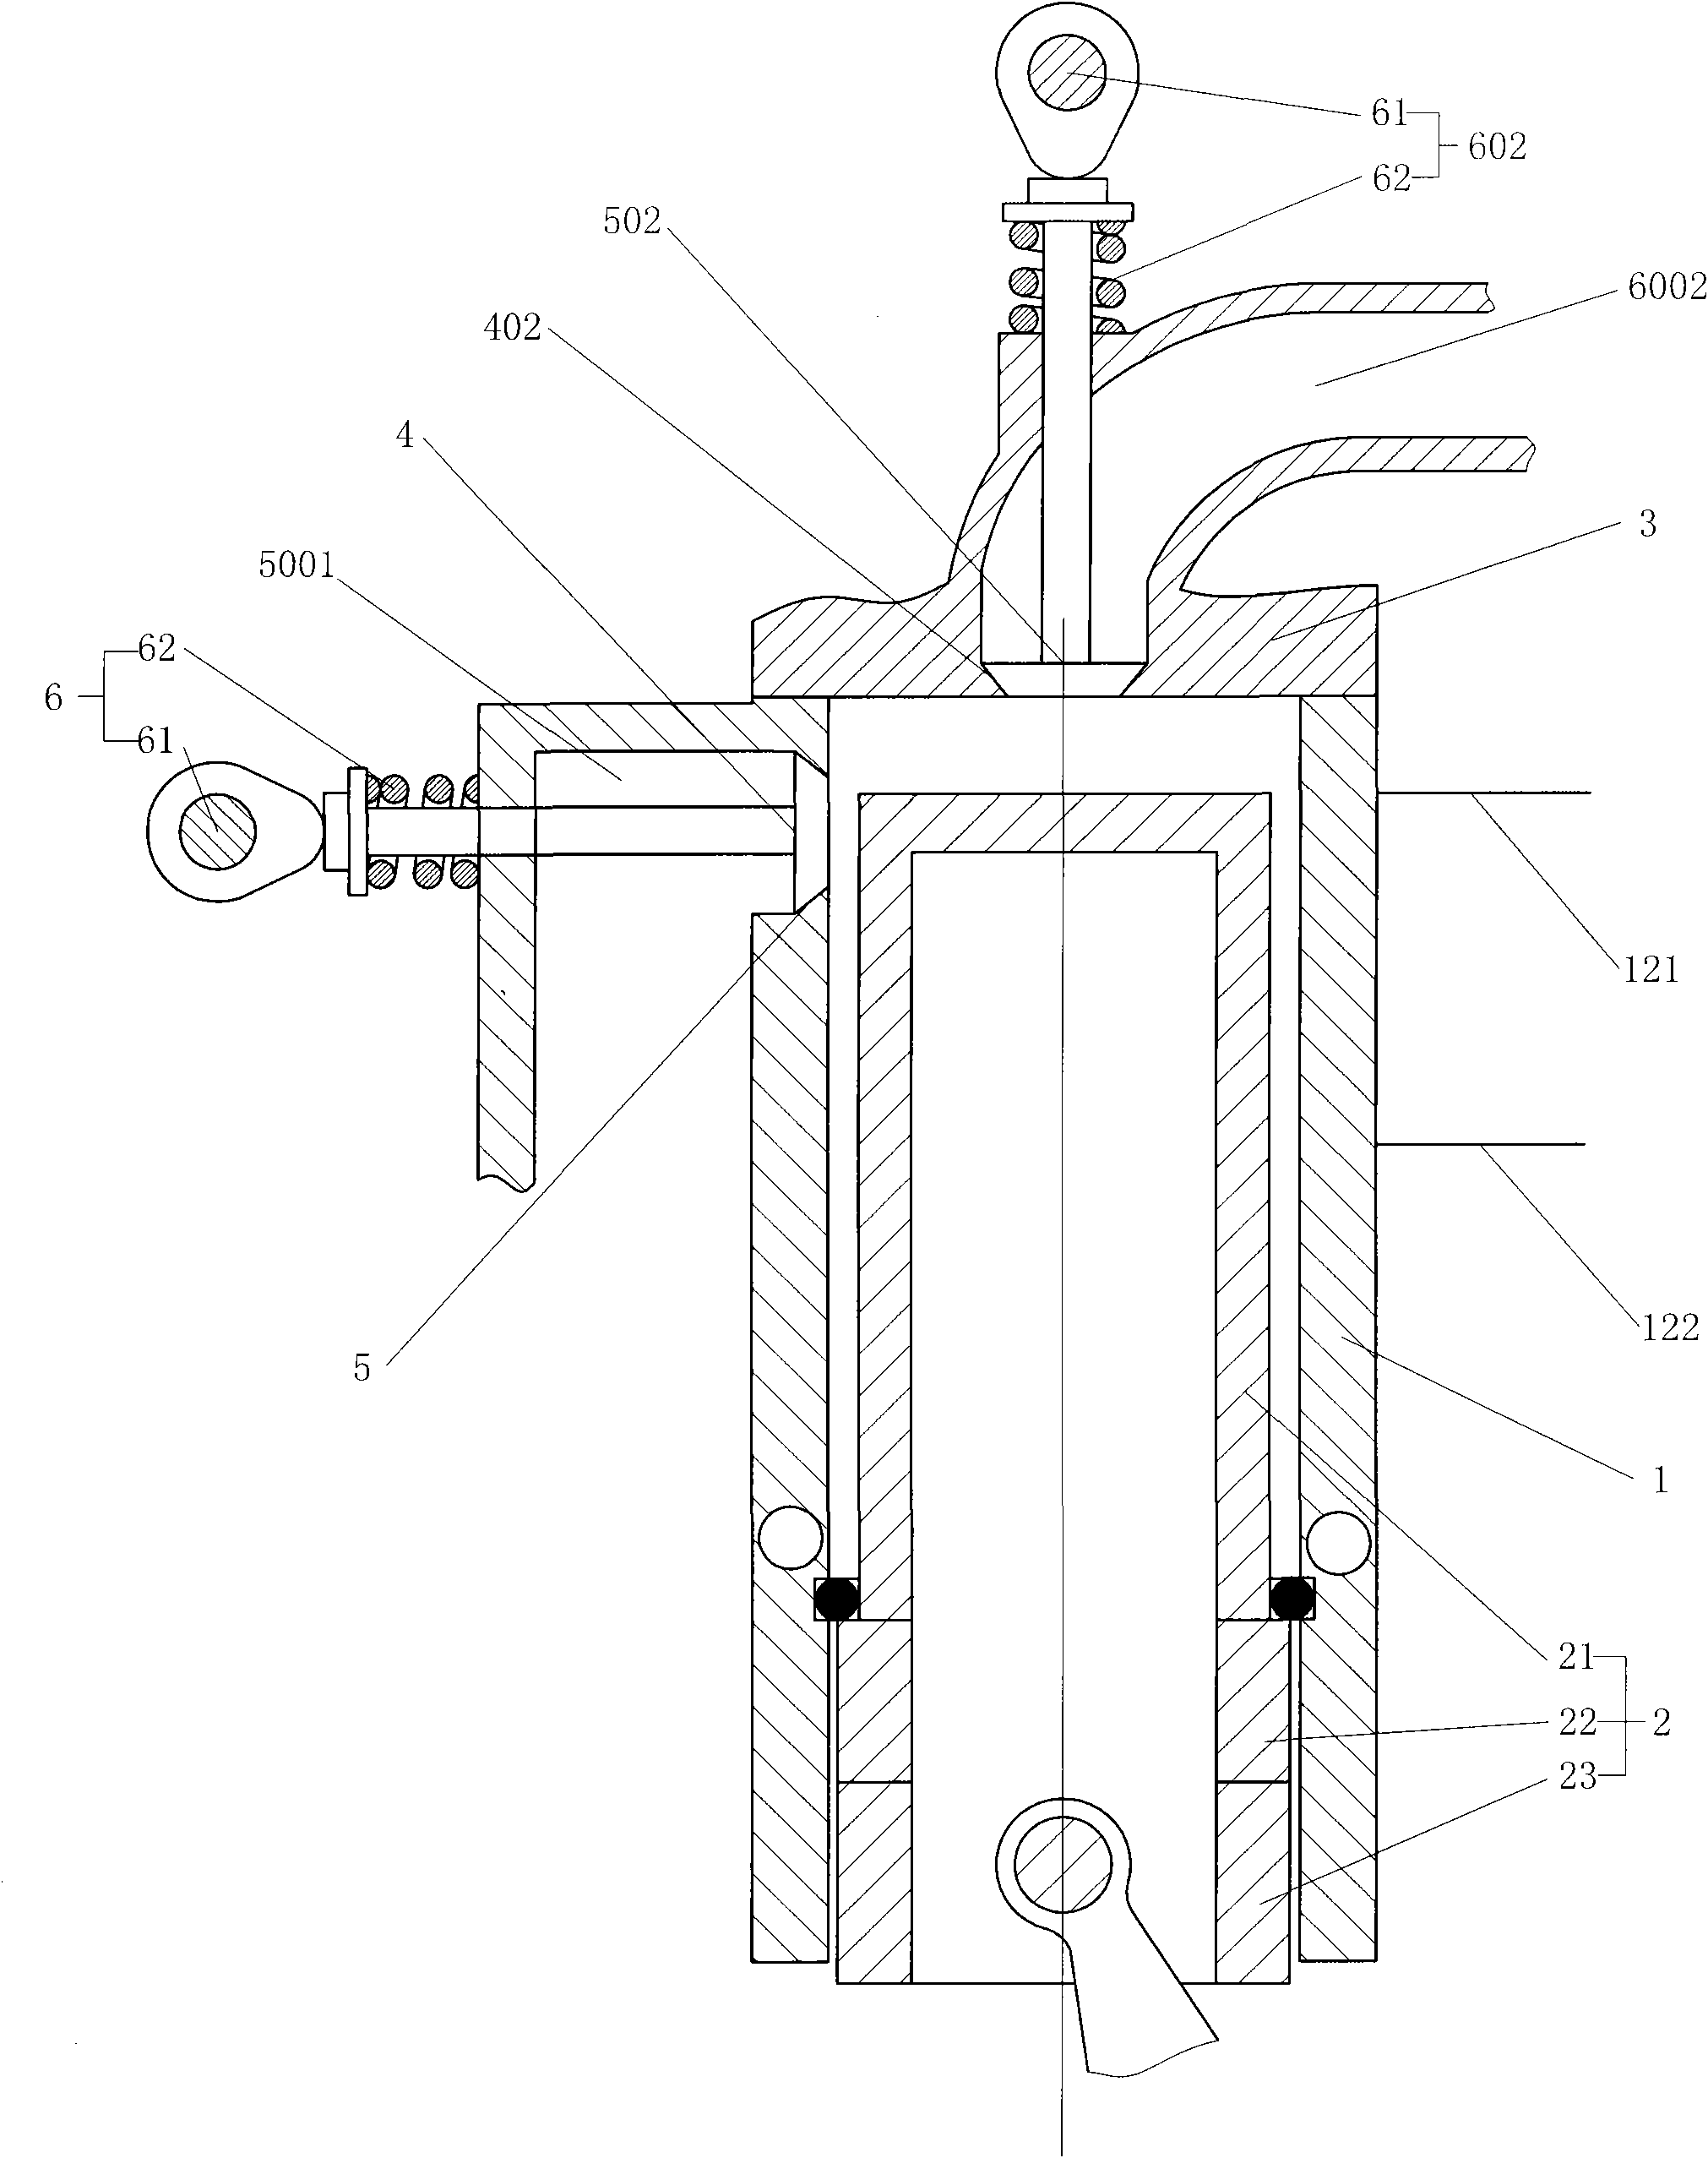 Right-angled distribution engine with suspension piston